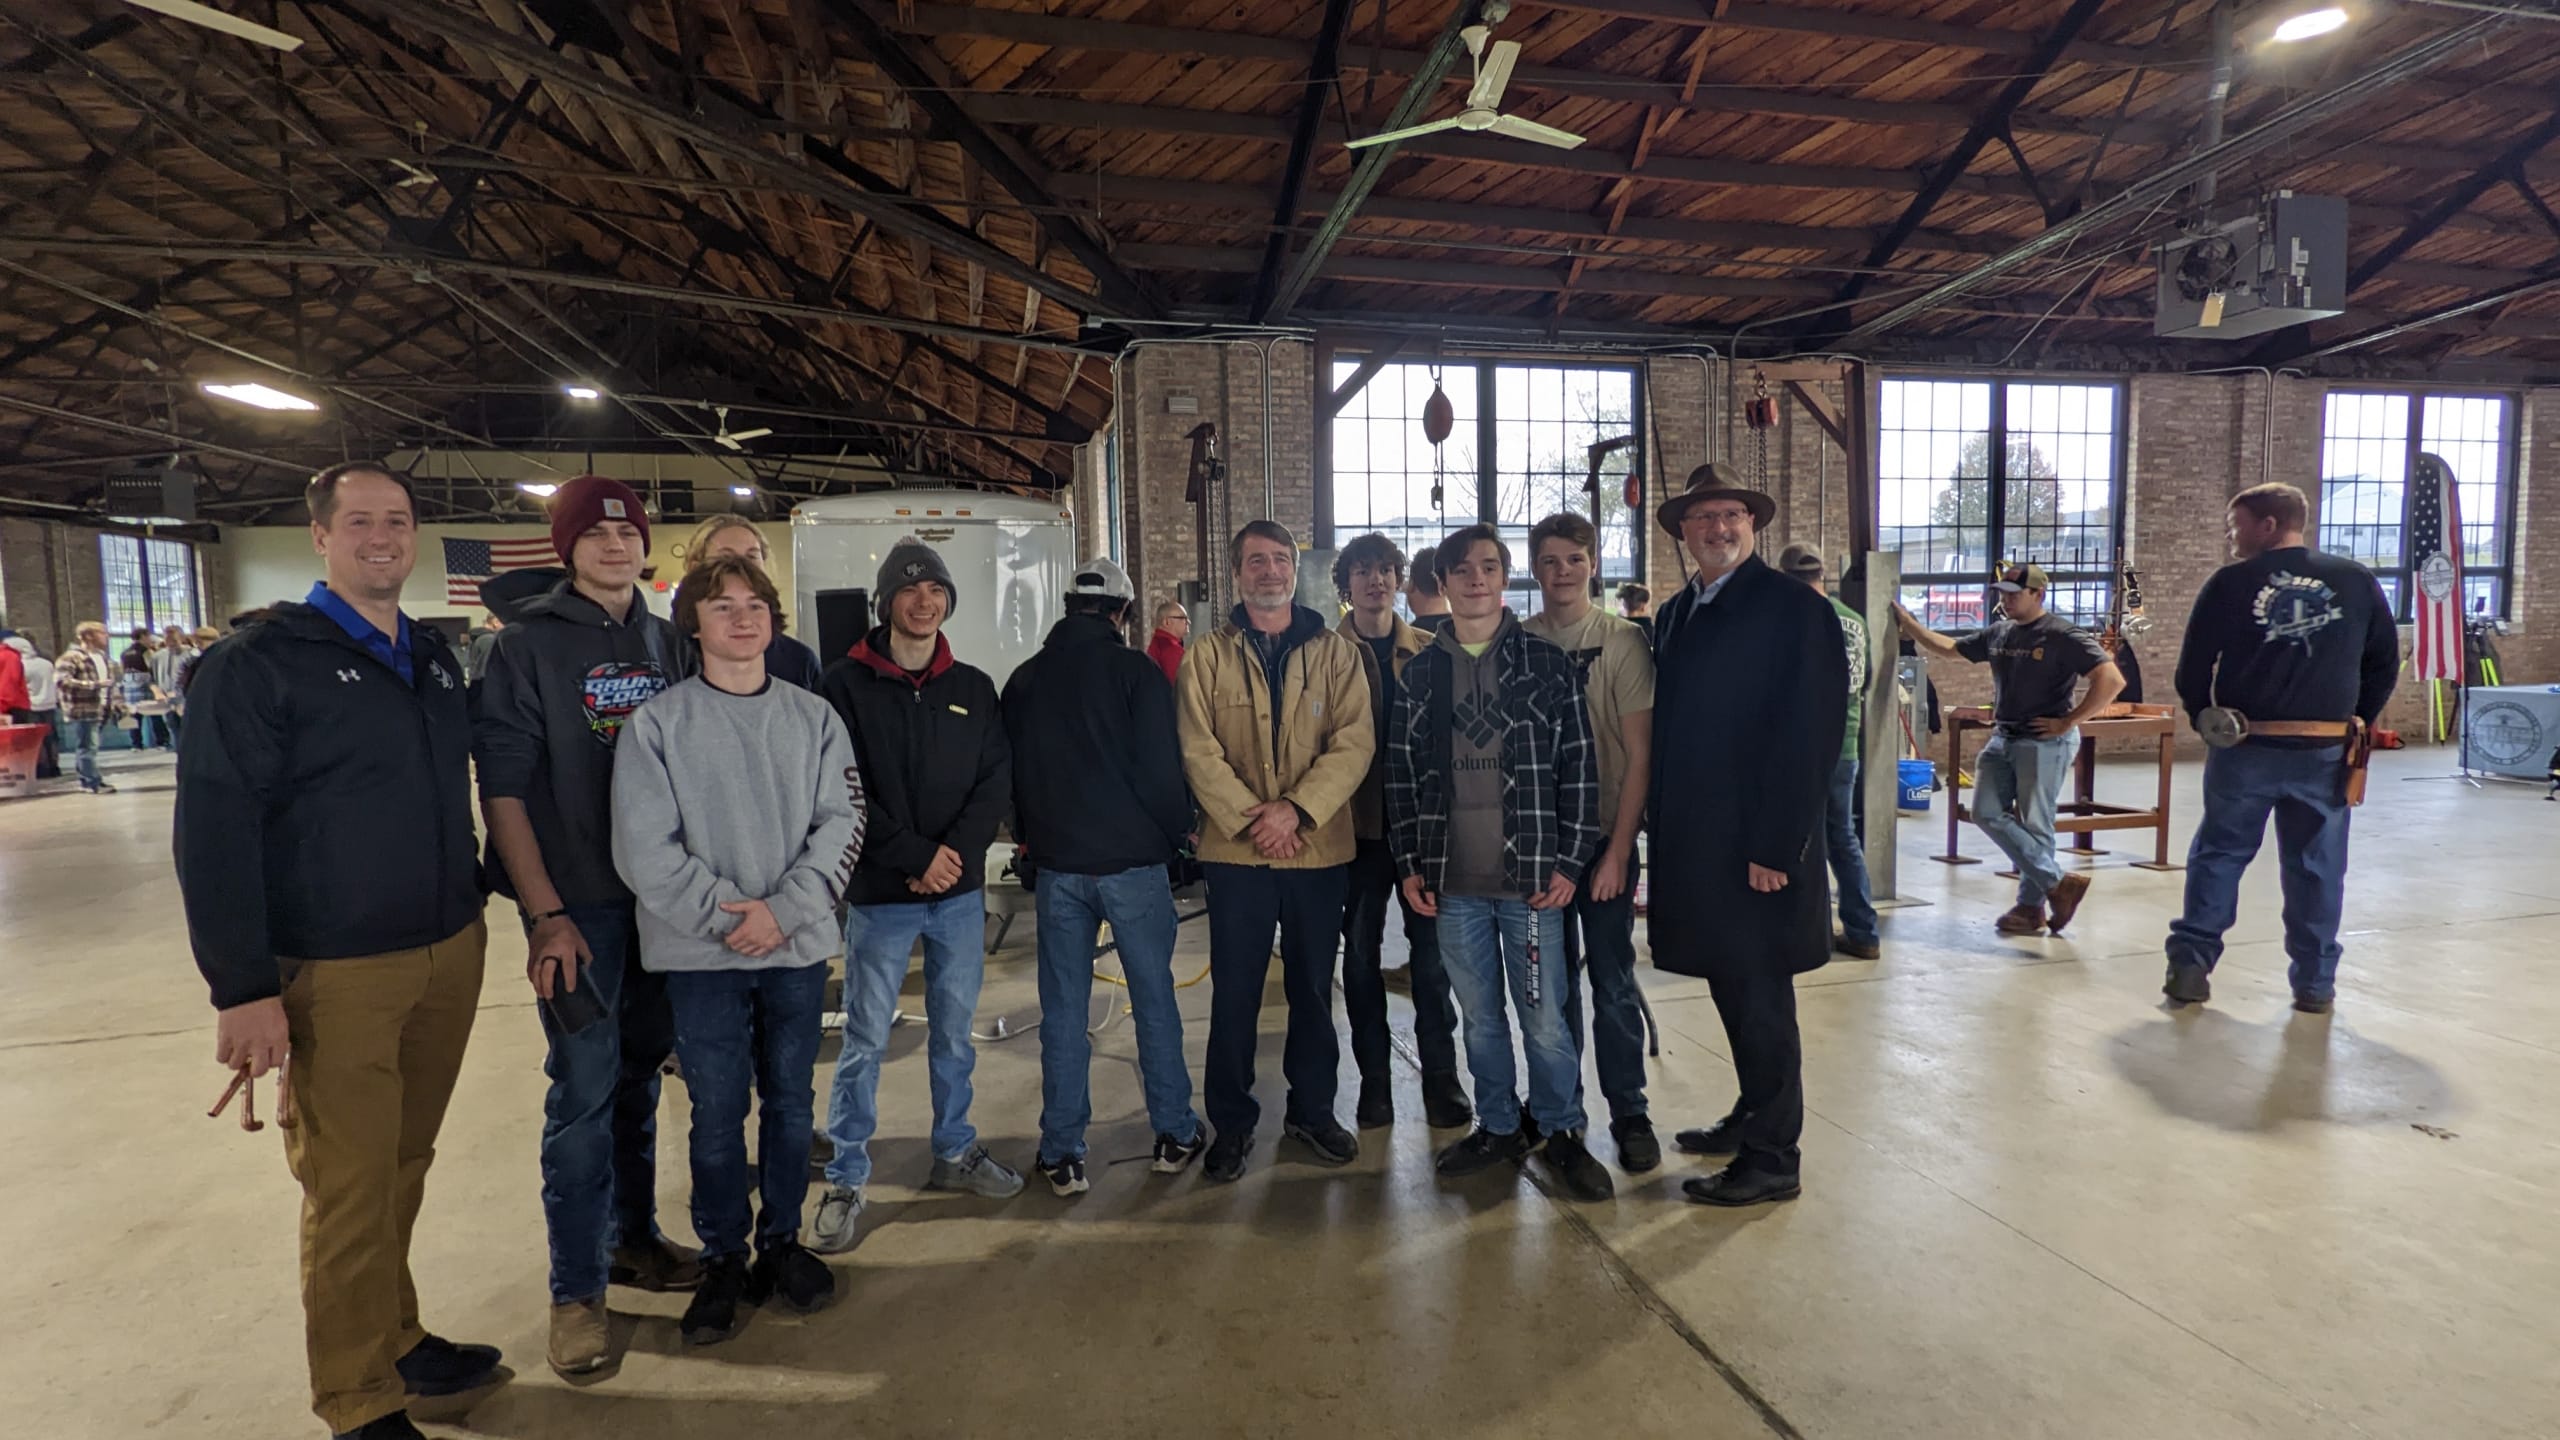 Assistant Principal Mr. Smolinski, Shop Teacher Mr. Richardson, Superintendent Dr. Veracco with some of the Lake Central students that attended the 6th Annual Hands on Construction & Skilled Trades Expo at the Lake County Fairgrounds.